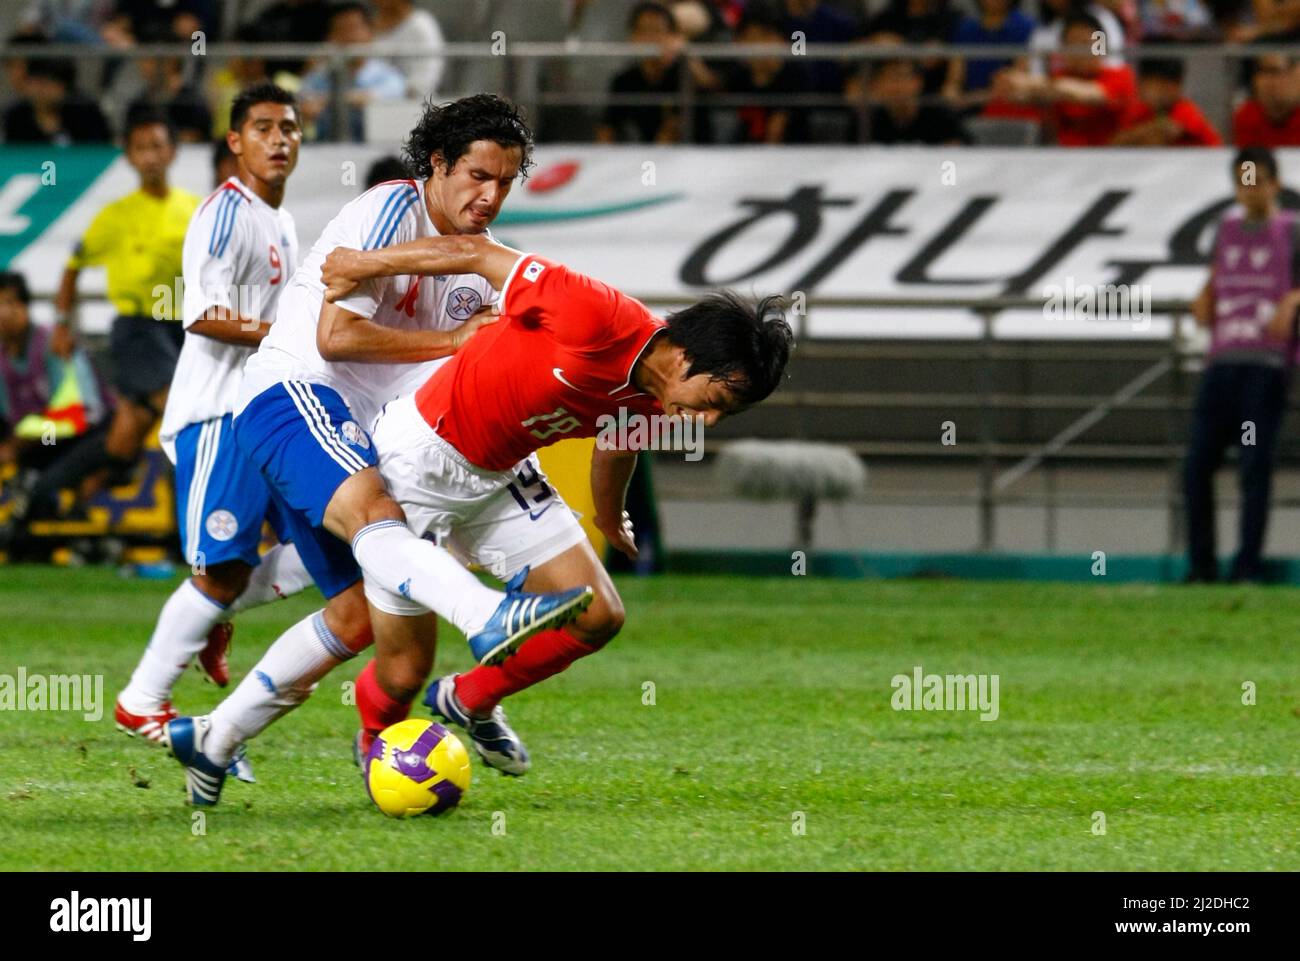 Aug 12, 2009-Seoul, South Korea-Yeom Ki-Hun(front), South Korea, and Cristian Riveros, Paraguay, compete for the ball during the international friendly match between South Korea and Paraguay at Seoul Worldcup stadium on August 12, 2009 in Seoul, South Korea. Stock Photo